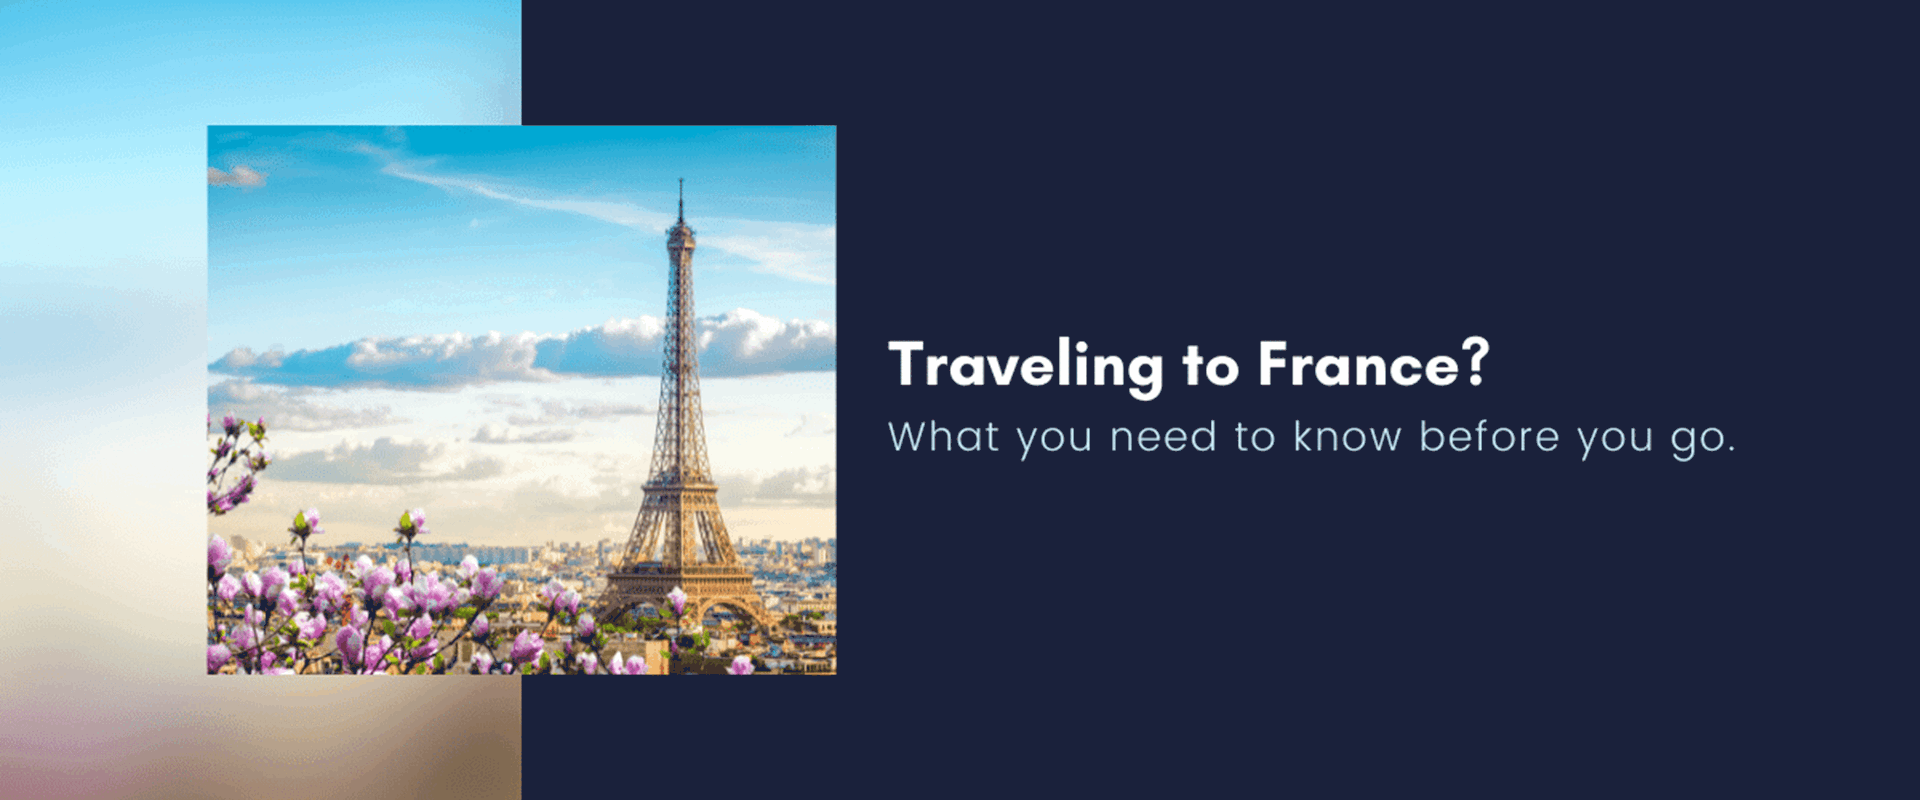 Travel Requirements For France Trawick Blog